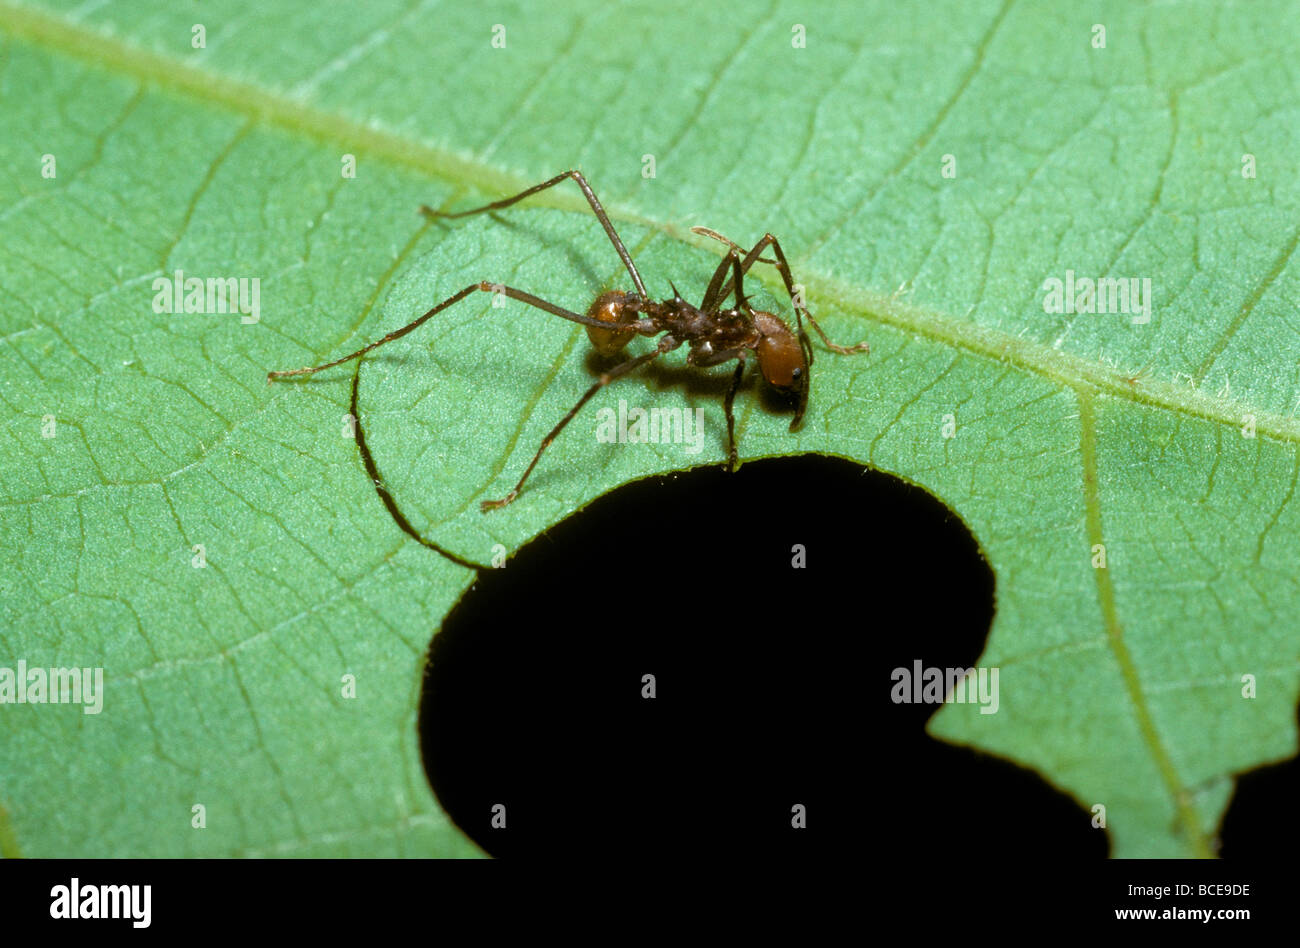 Leaf-cutting ant Atta cephalotes worker cutting a leaf segment to take back to the nest in rainforest, Costa Rica Stock Photo